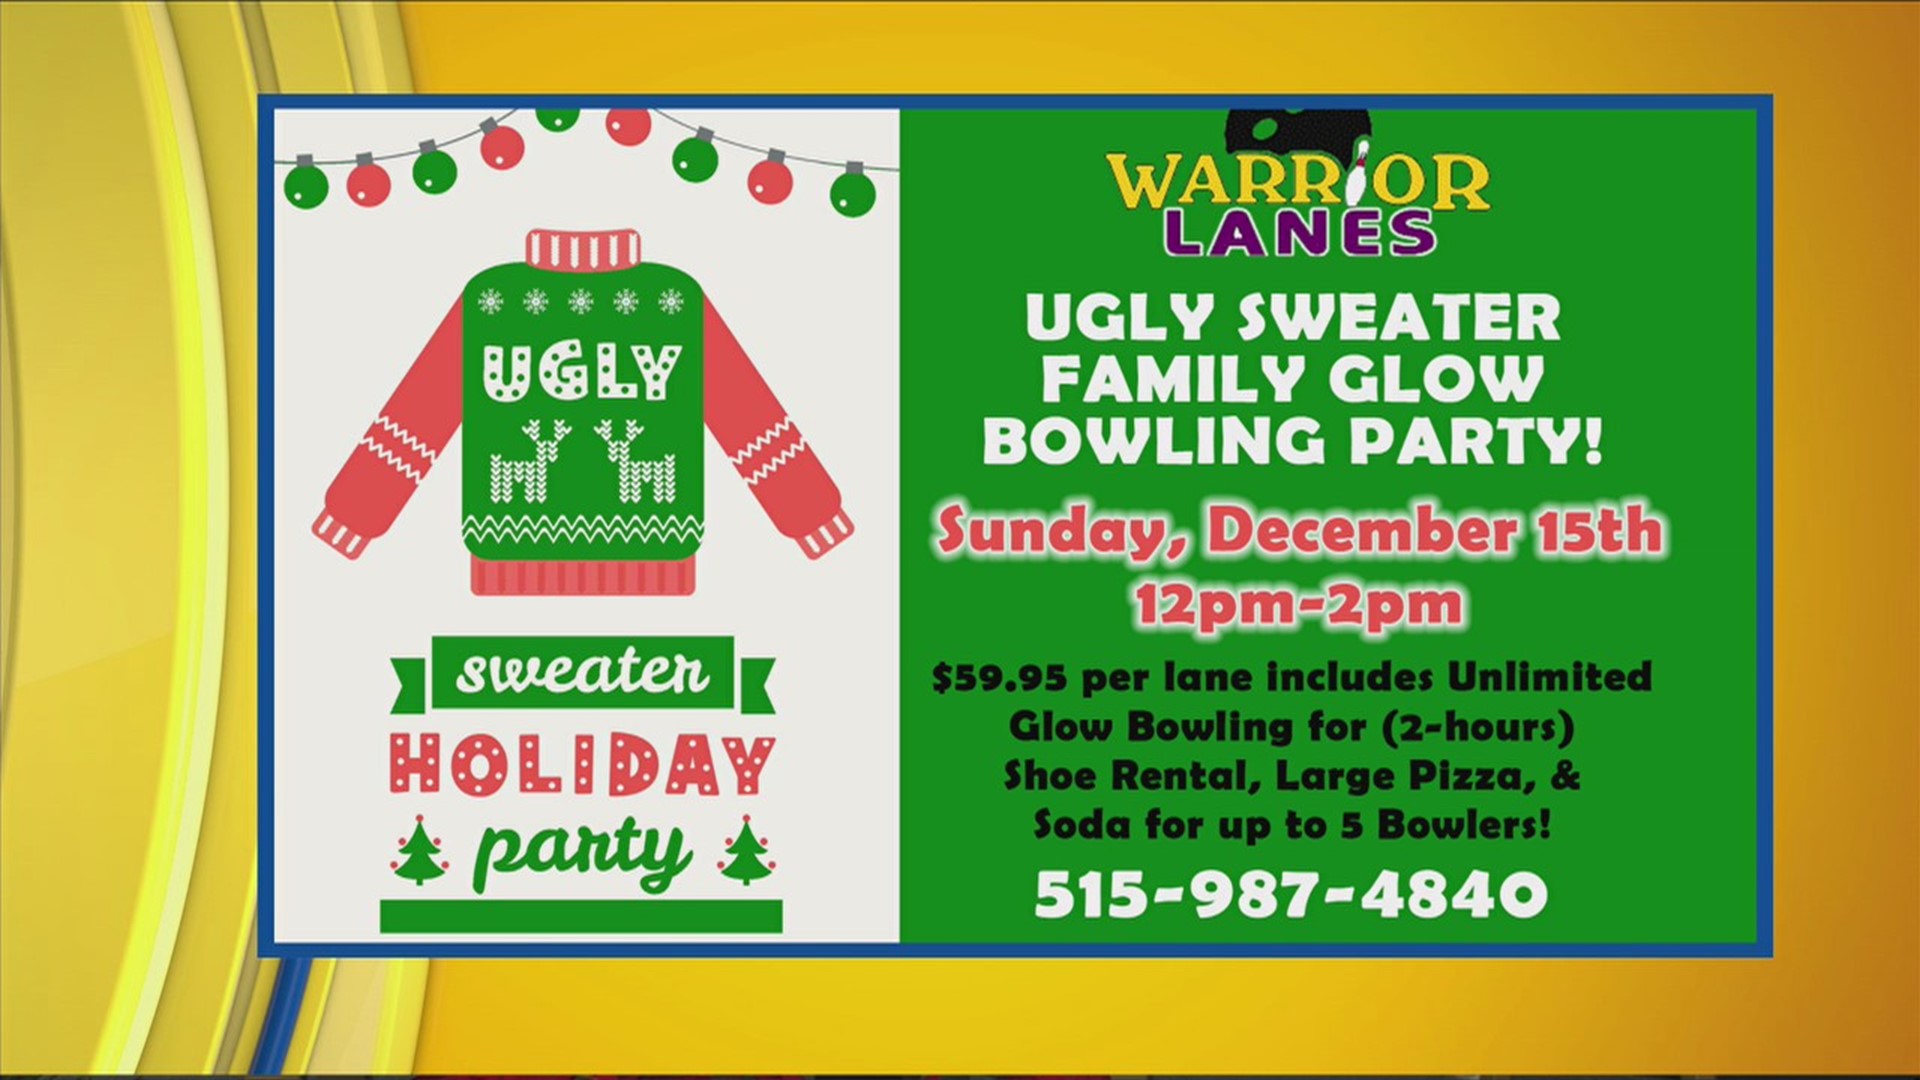 Warrior Lanes Ugly Sweater Family Glow Bowling Party